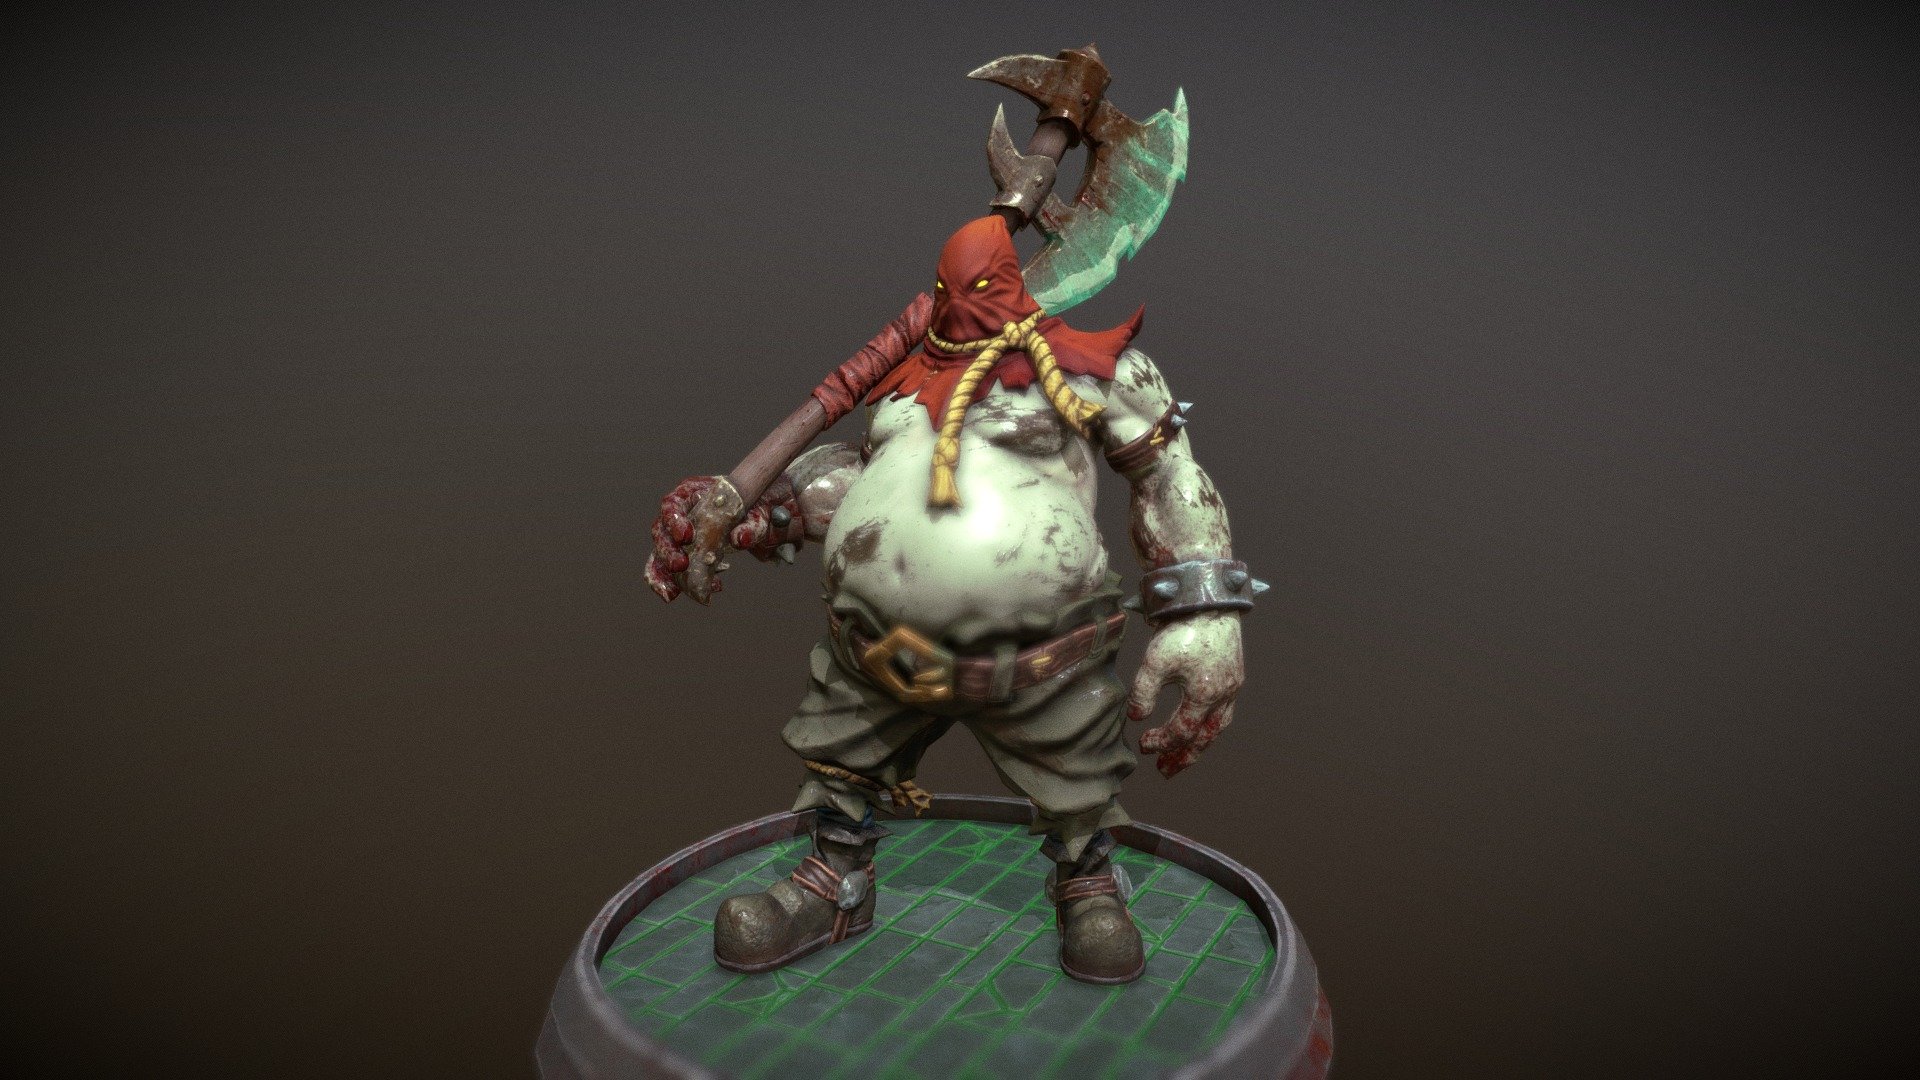 My fanart 3D model for Hangman from Battle Chasers, concept autor - incredible Joe Madureira.
Standart pipeline. HiPoly in Zbrush, retop and UV in Blender, texturing in Substance Painter, rig and posing in Blender.
Polycount: 14500 tris in Body, 2700 tris in Axe 3d model